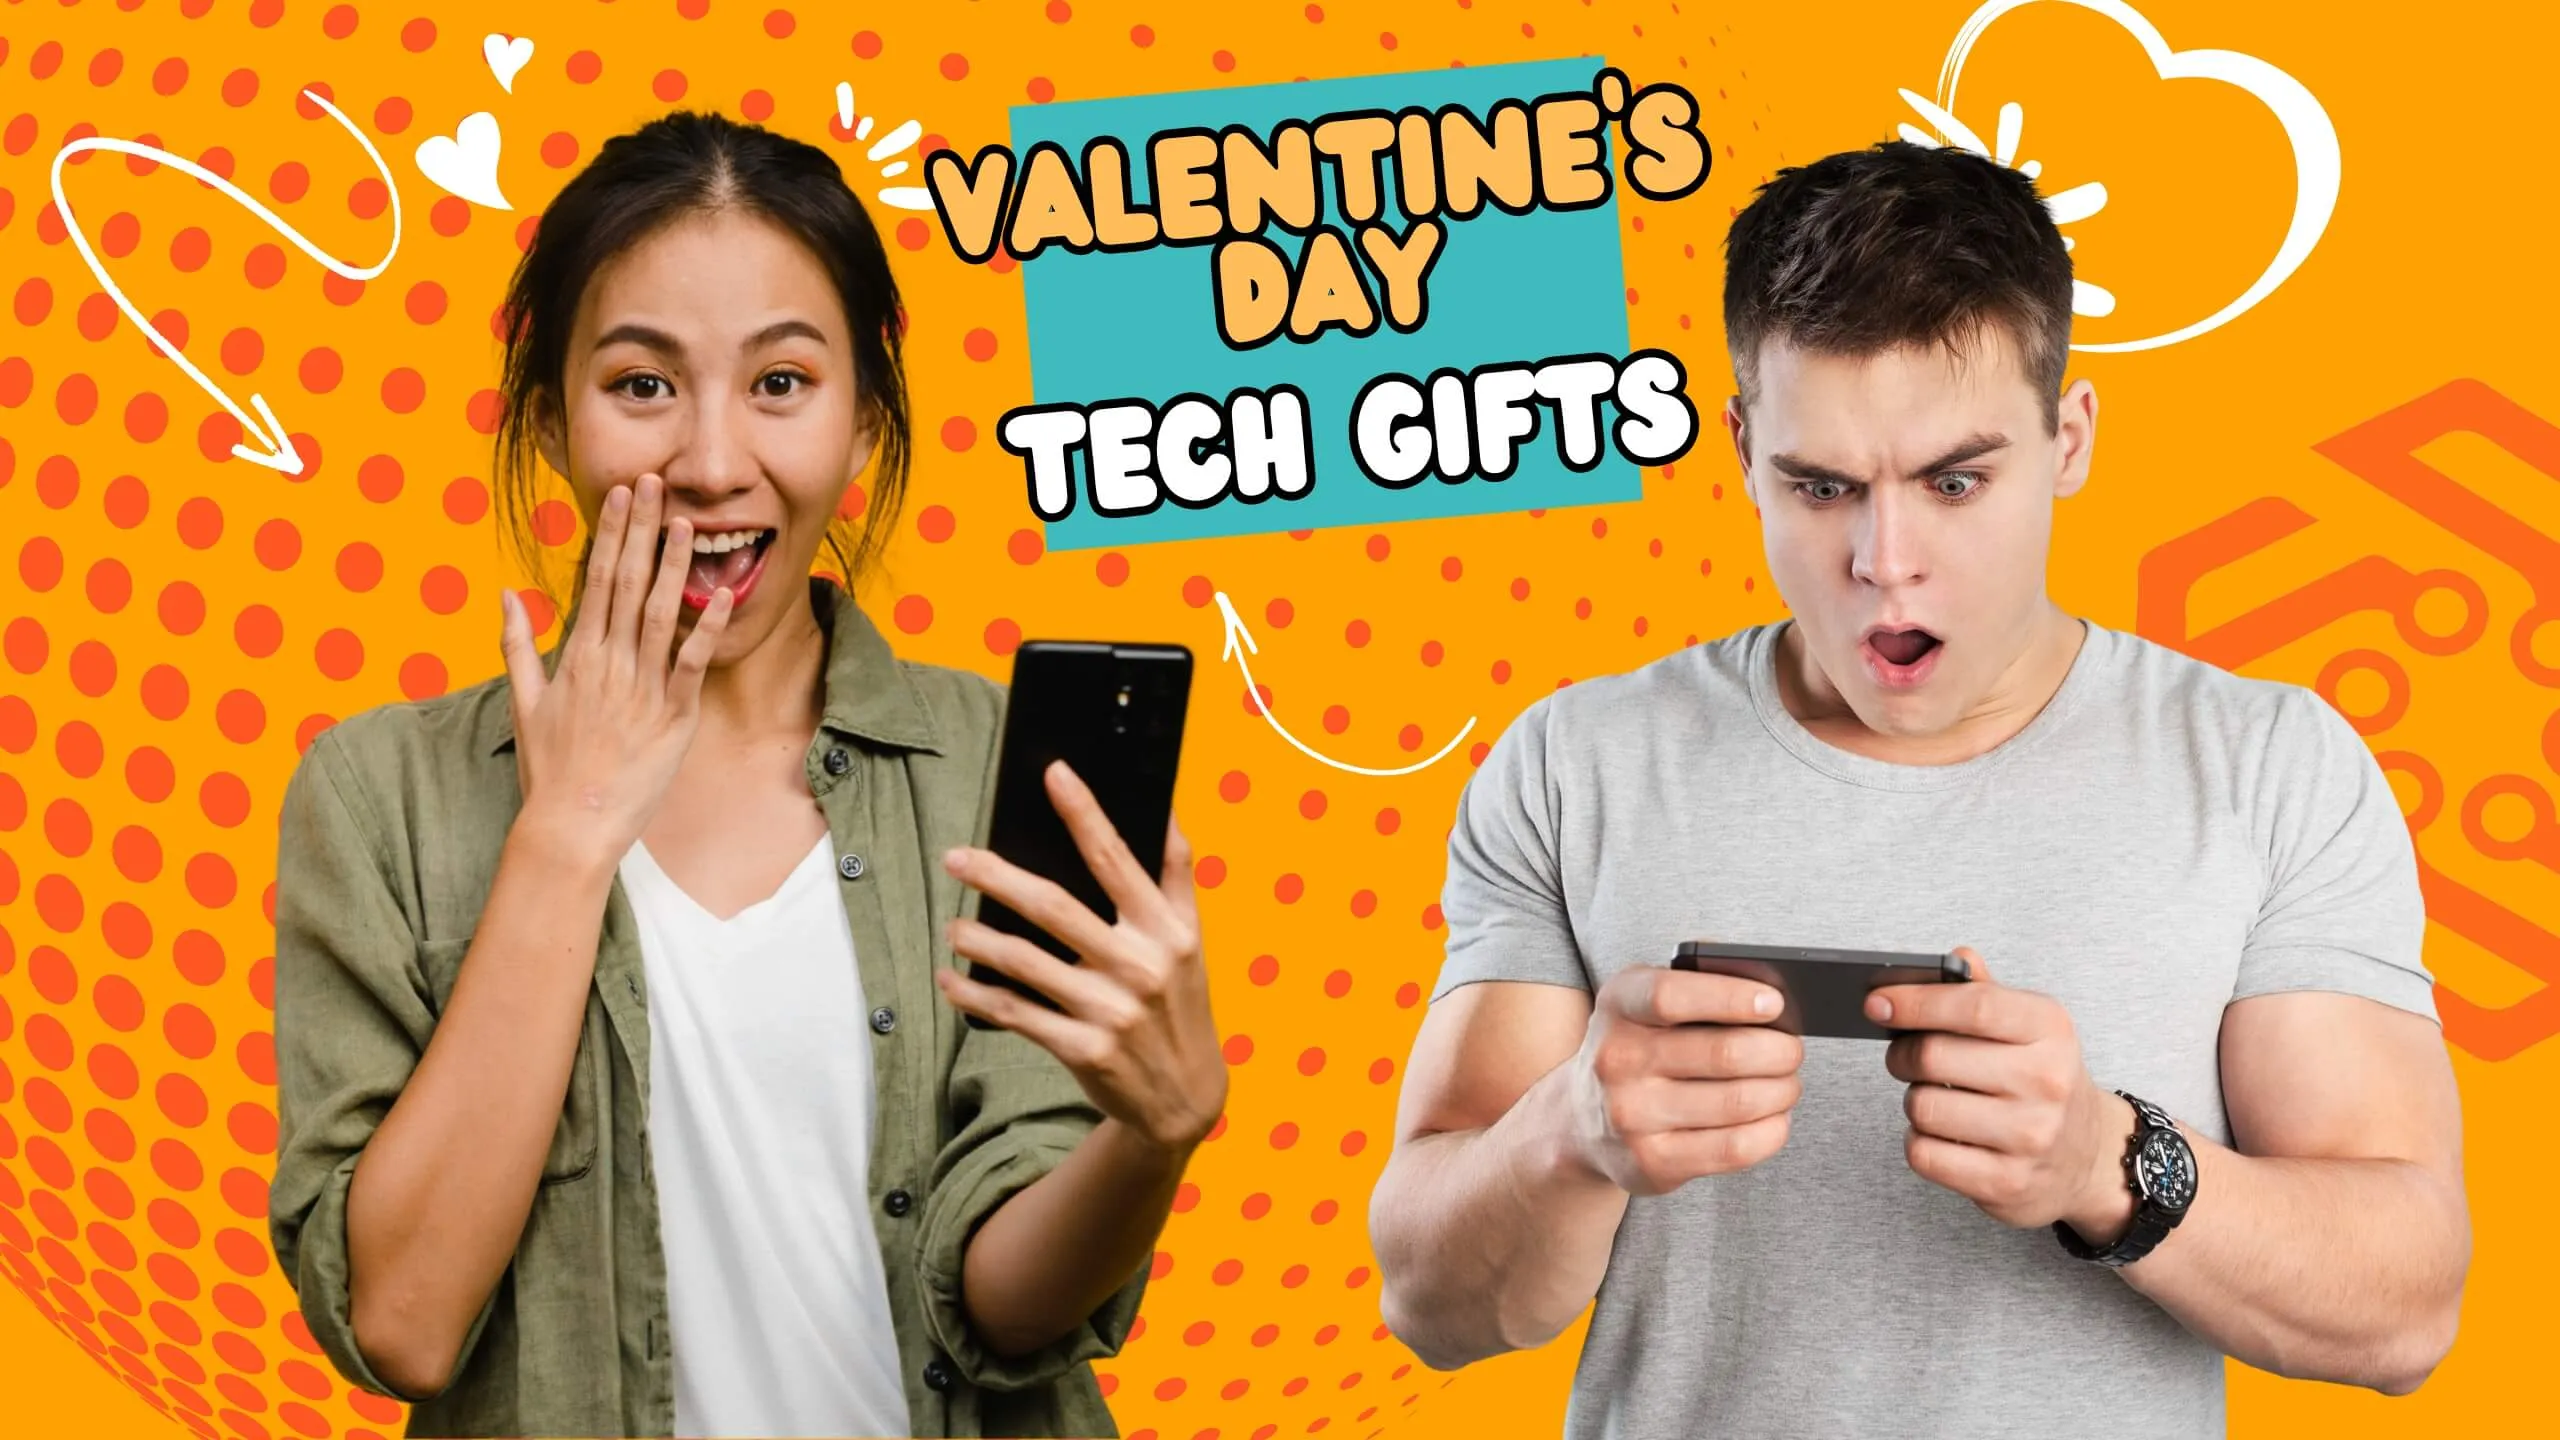 Excited woman and man with phones find a Valentine's Day gifts